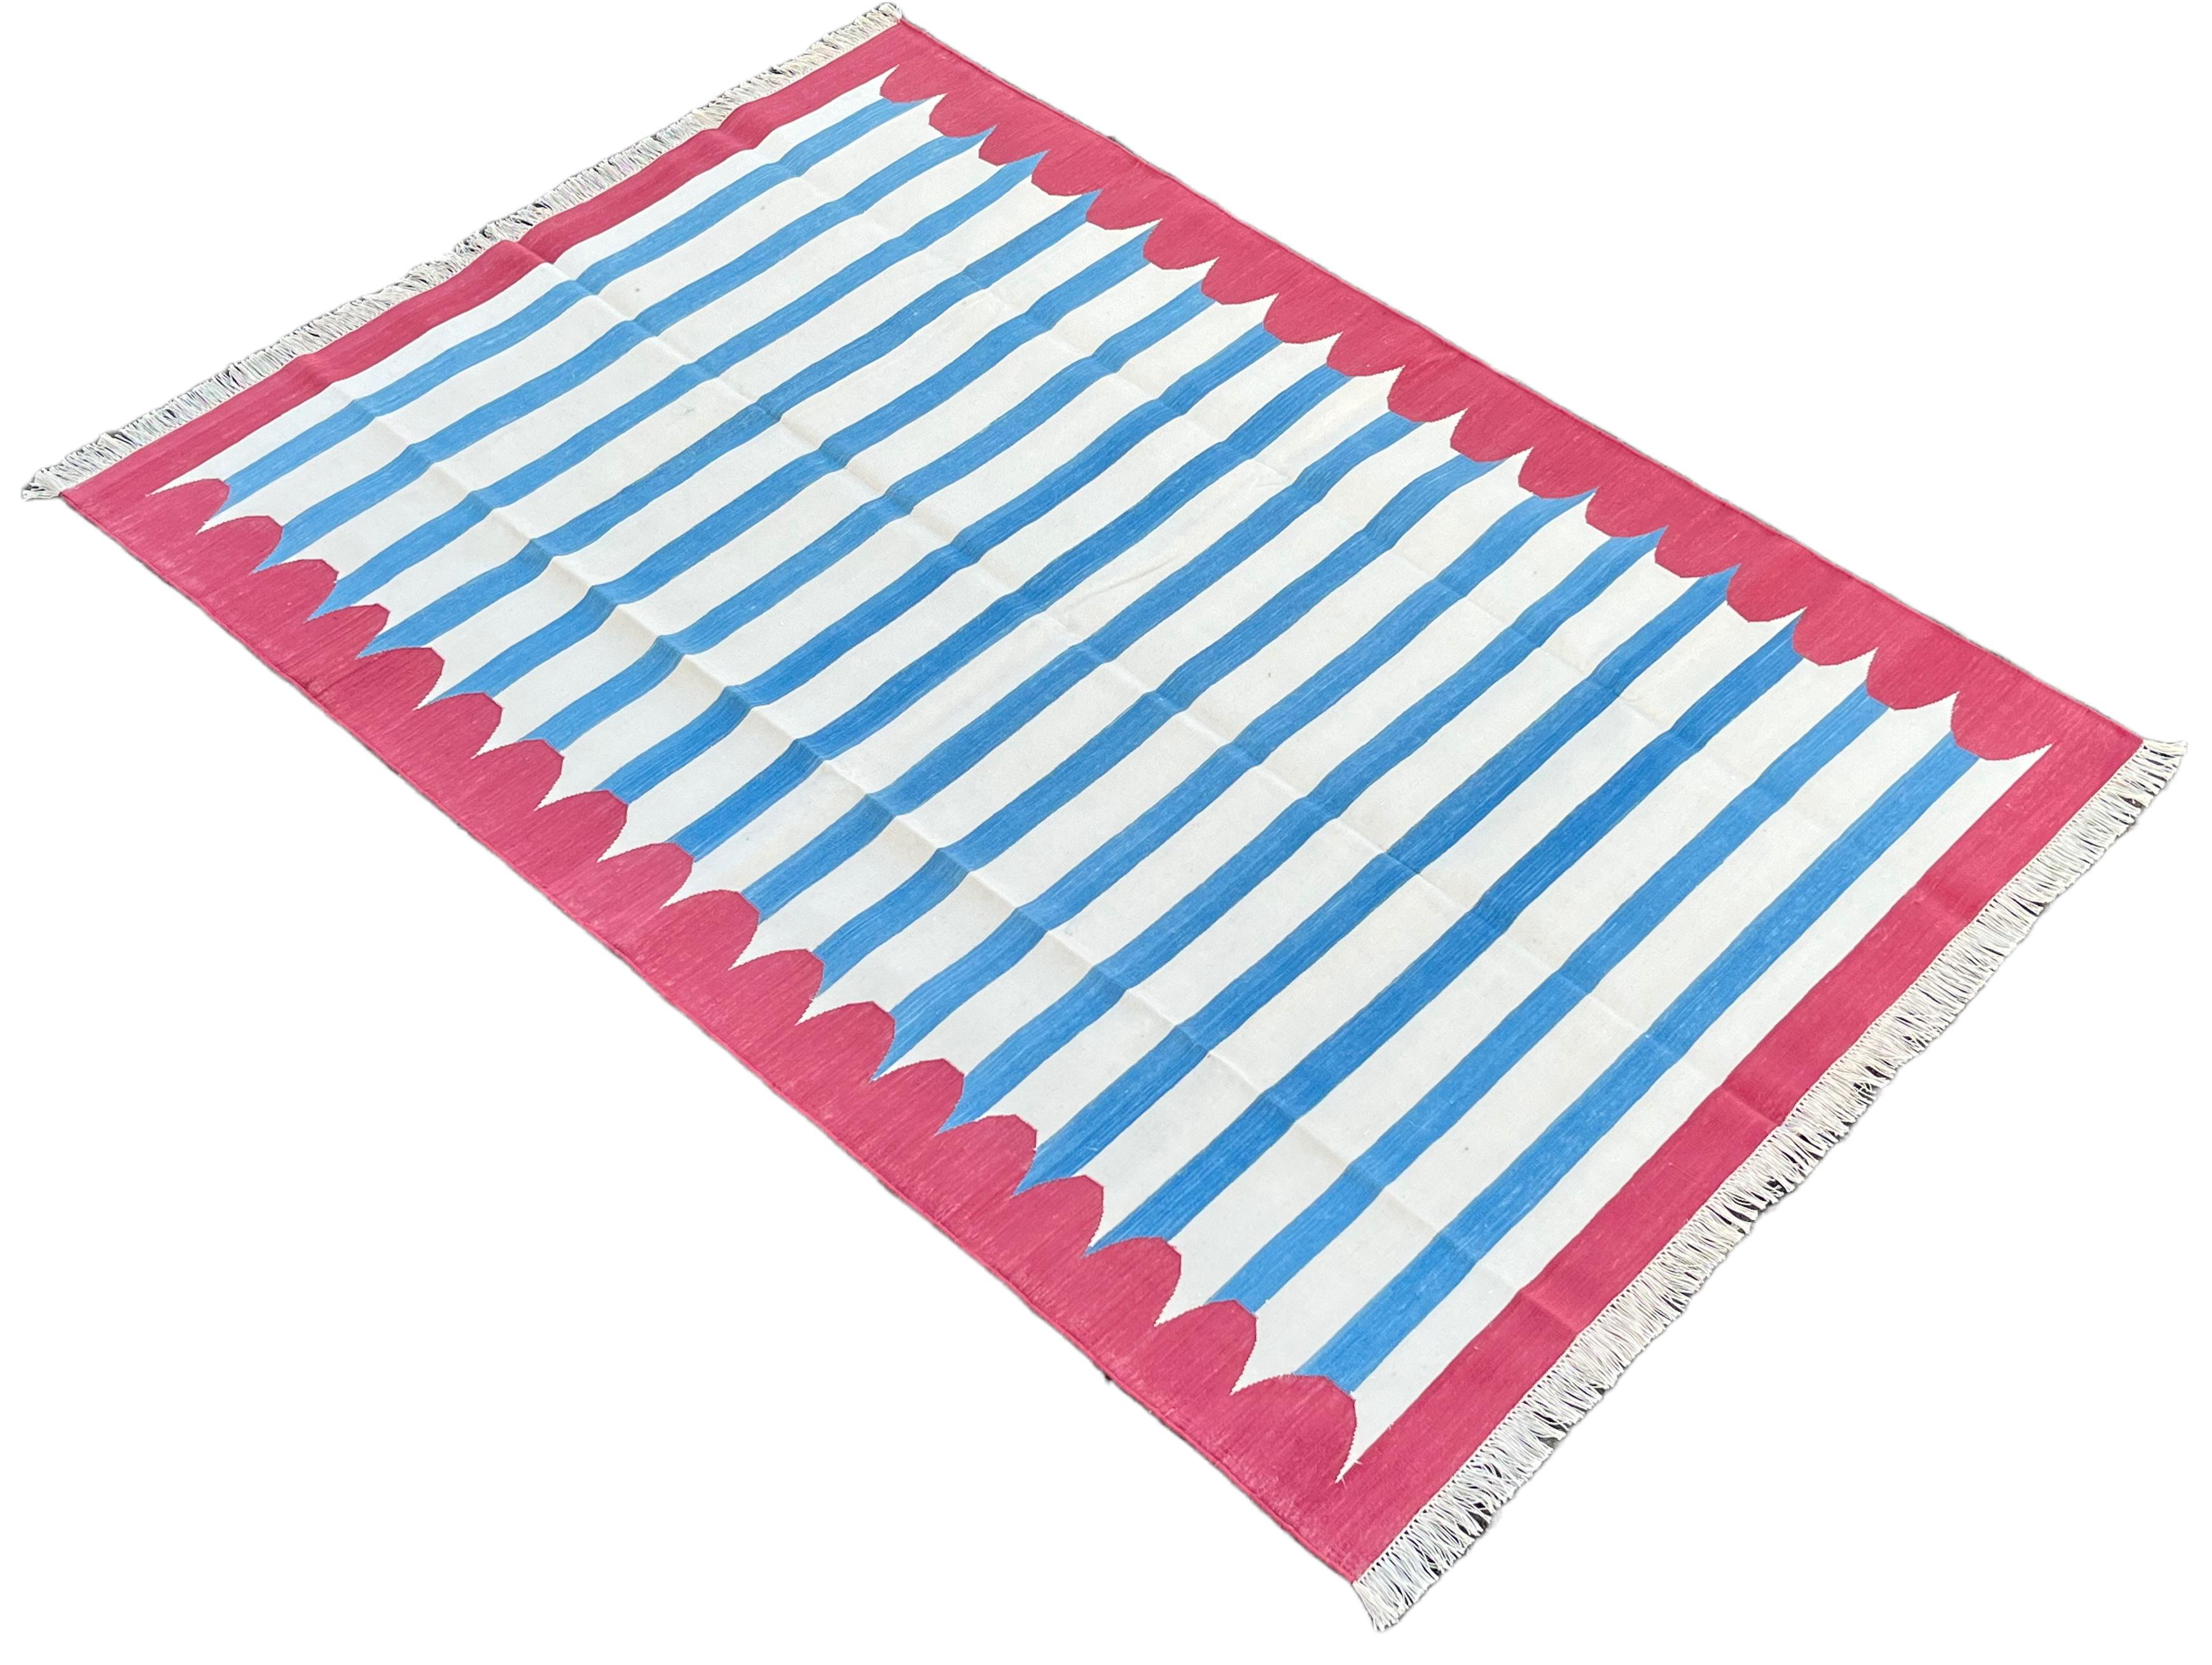 Cotton Vegetable Dyed Pink And Blue Scalloped Striped Indian Dhurrie Rug-5'x7' 
These special flat-weave dhurries are hand-woven with 15 ply 100% cotton yarn. Due to the special manufacturing techniques used to create our rugs, the size and color of